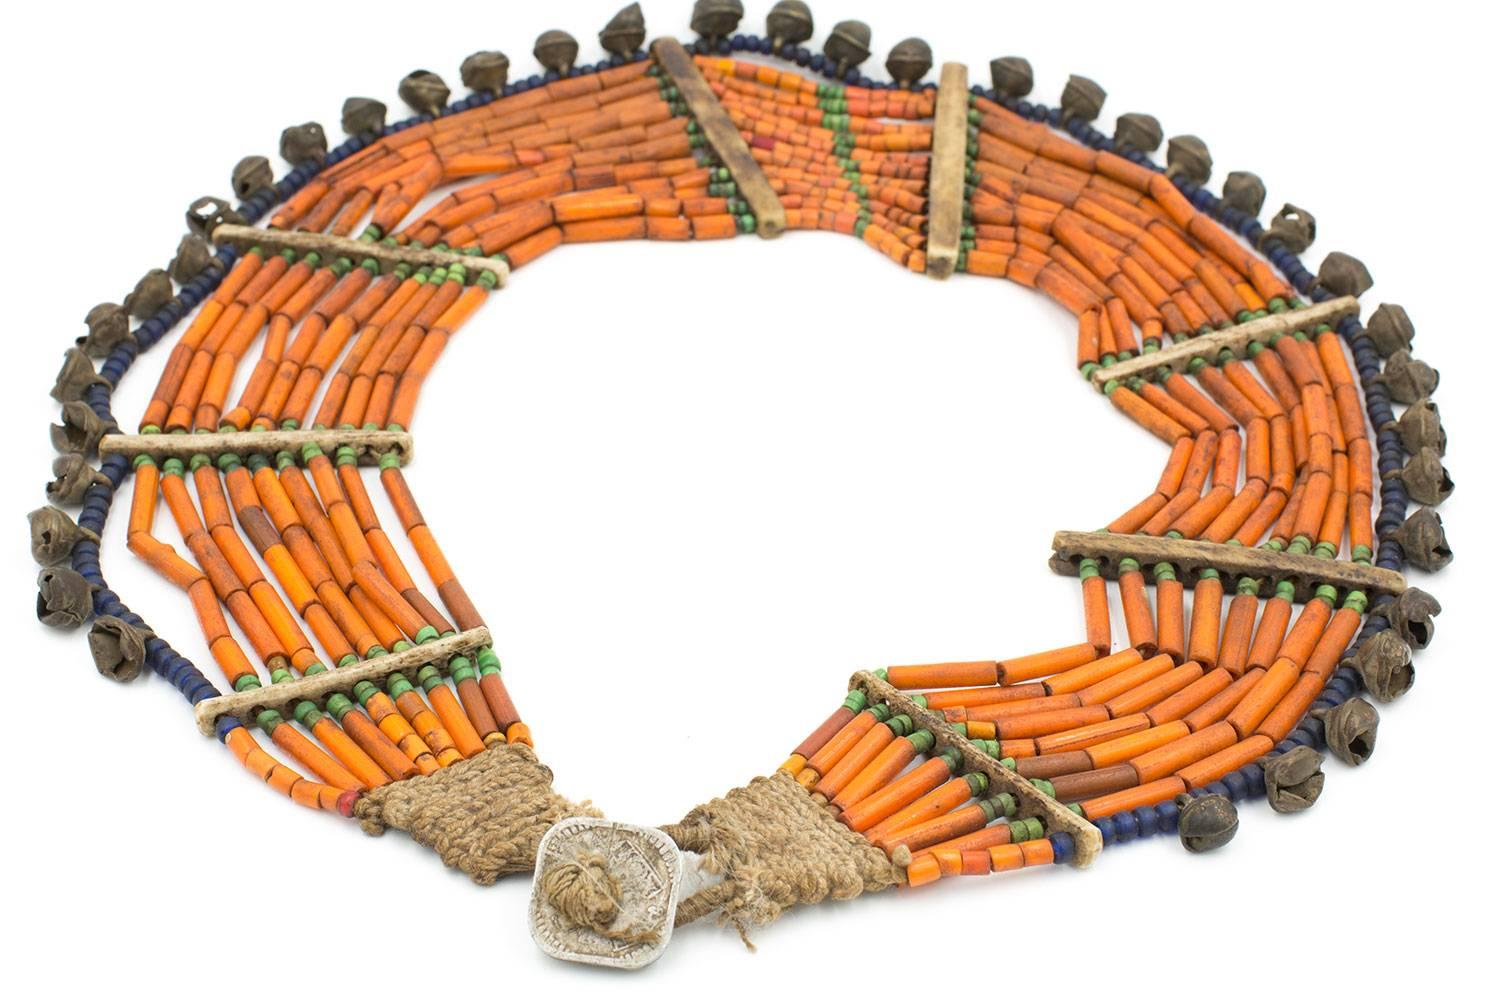 Hand-Crafted Antique Primitive Tribal Necklace from Nagaland